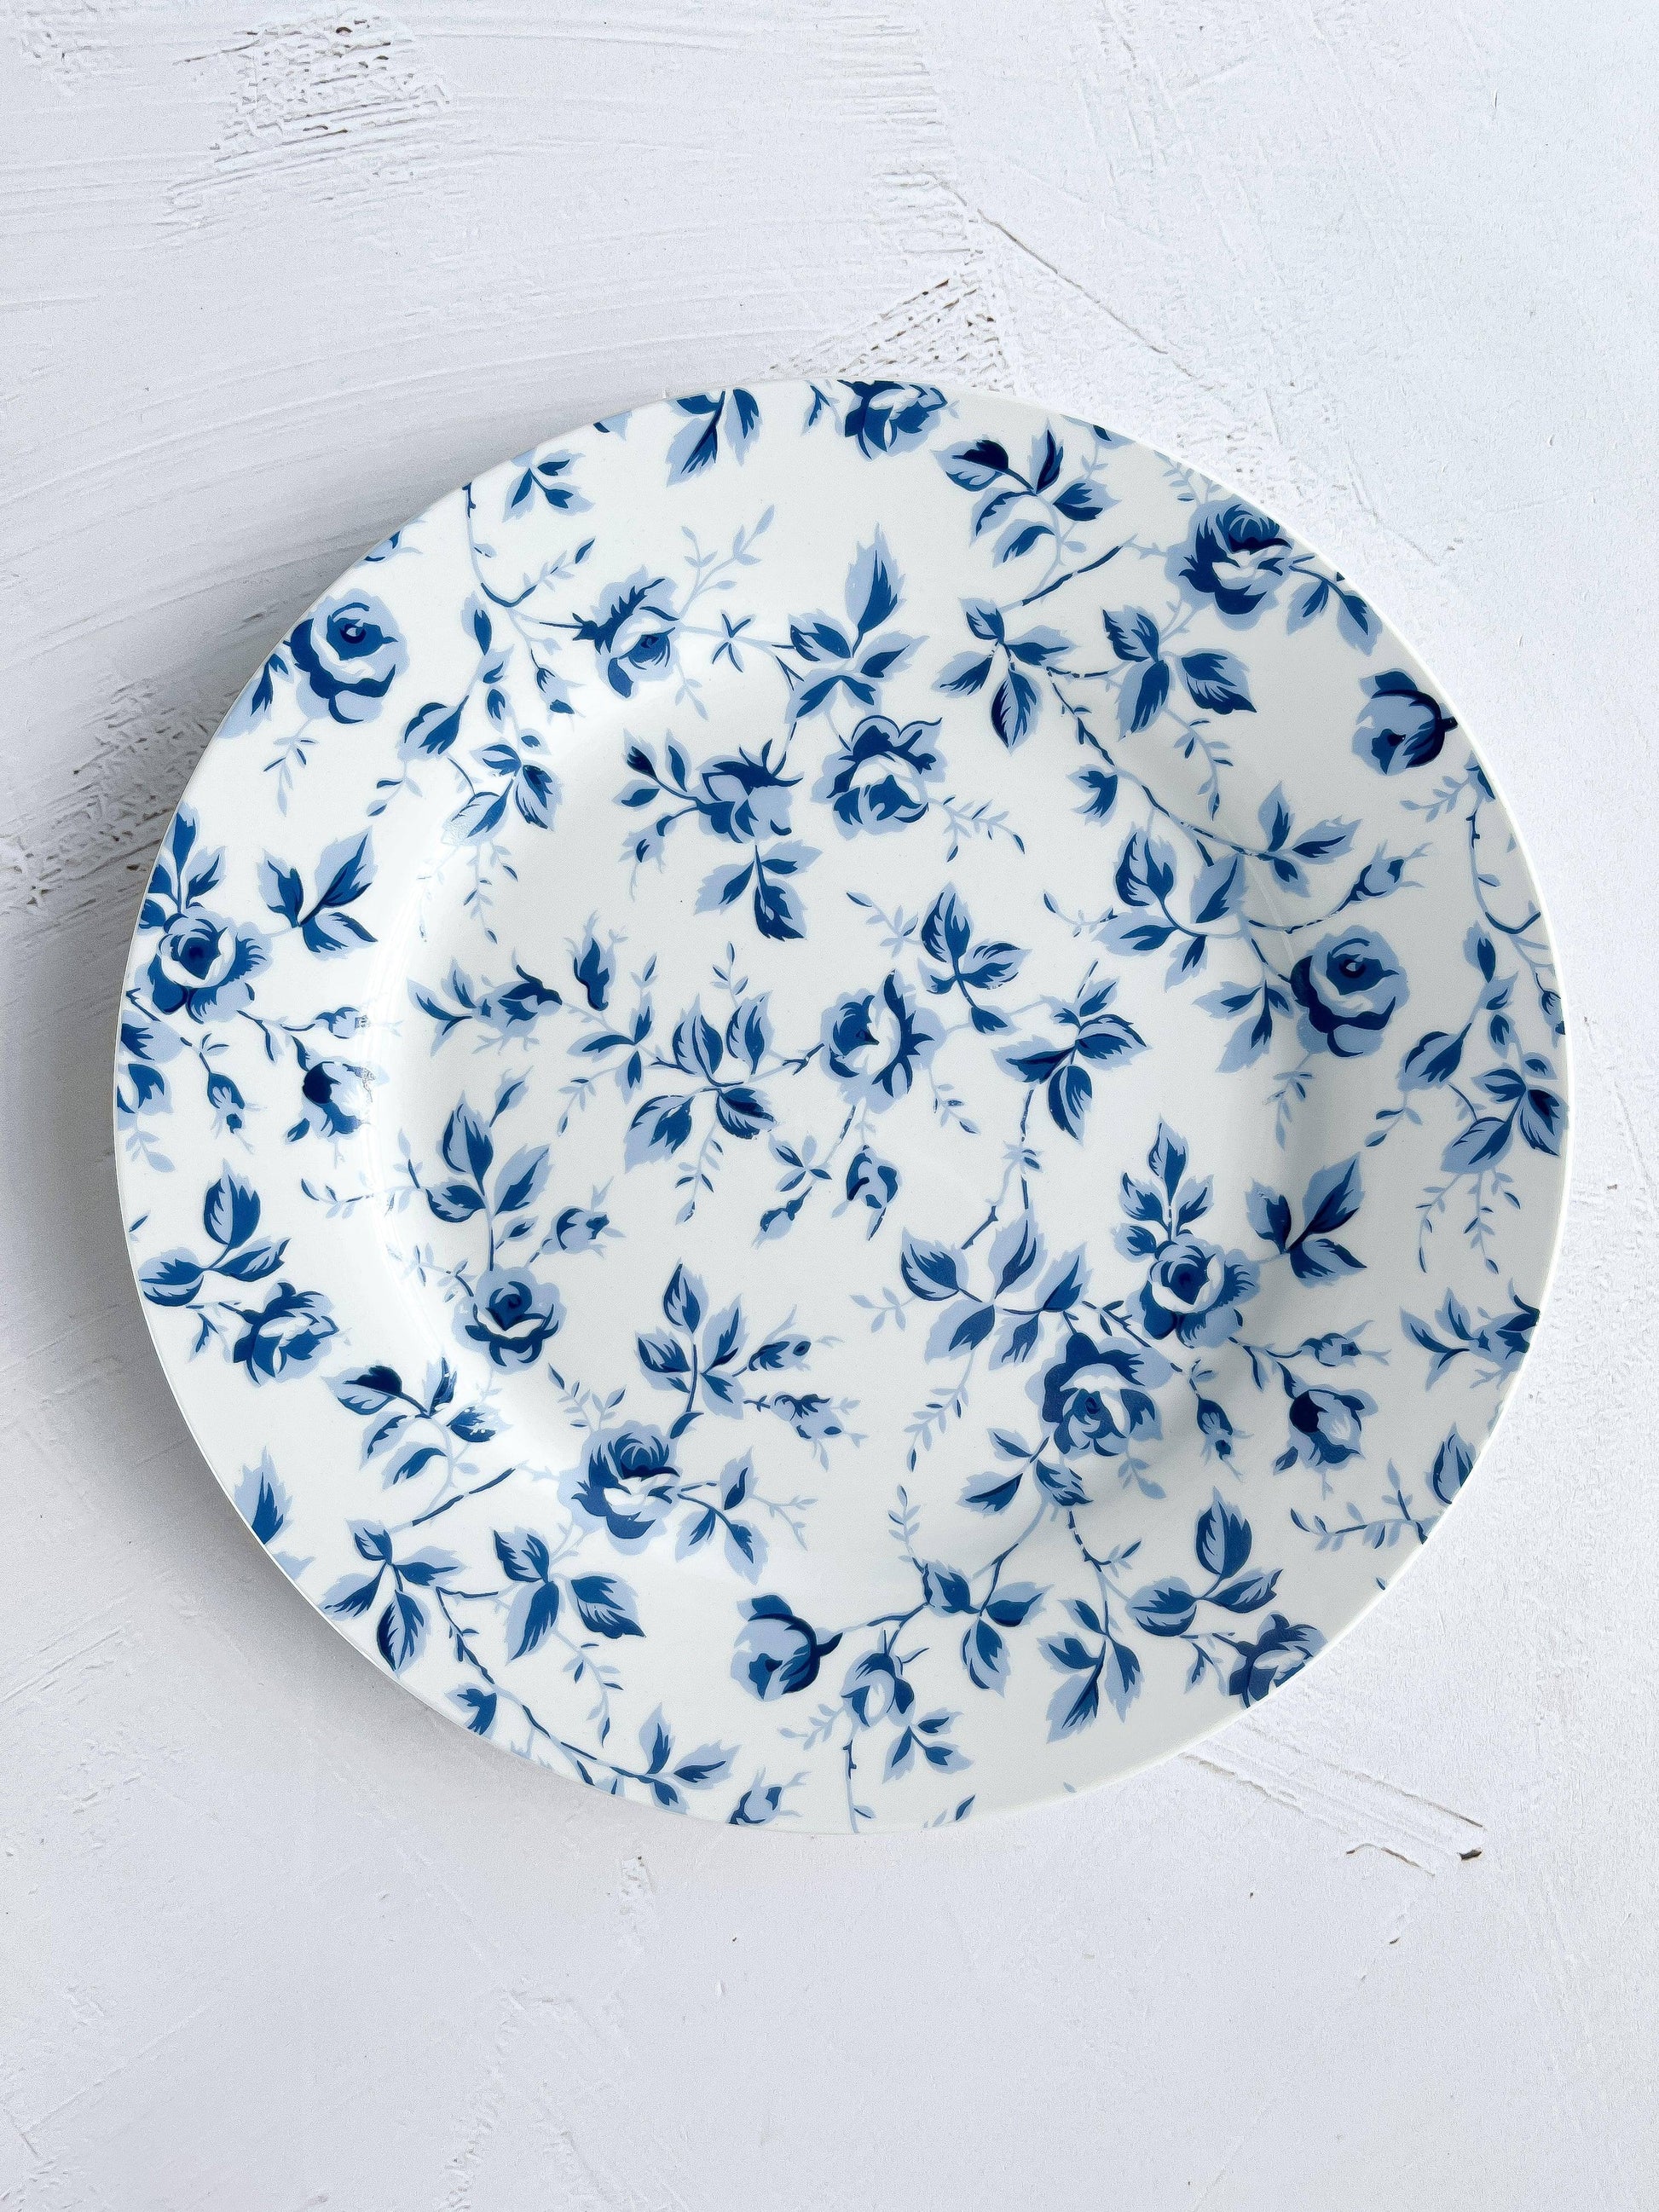 Classic Blue Floral Side Plate - Set of 2 - SOSC Home